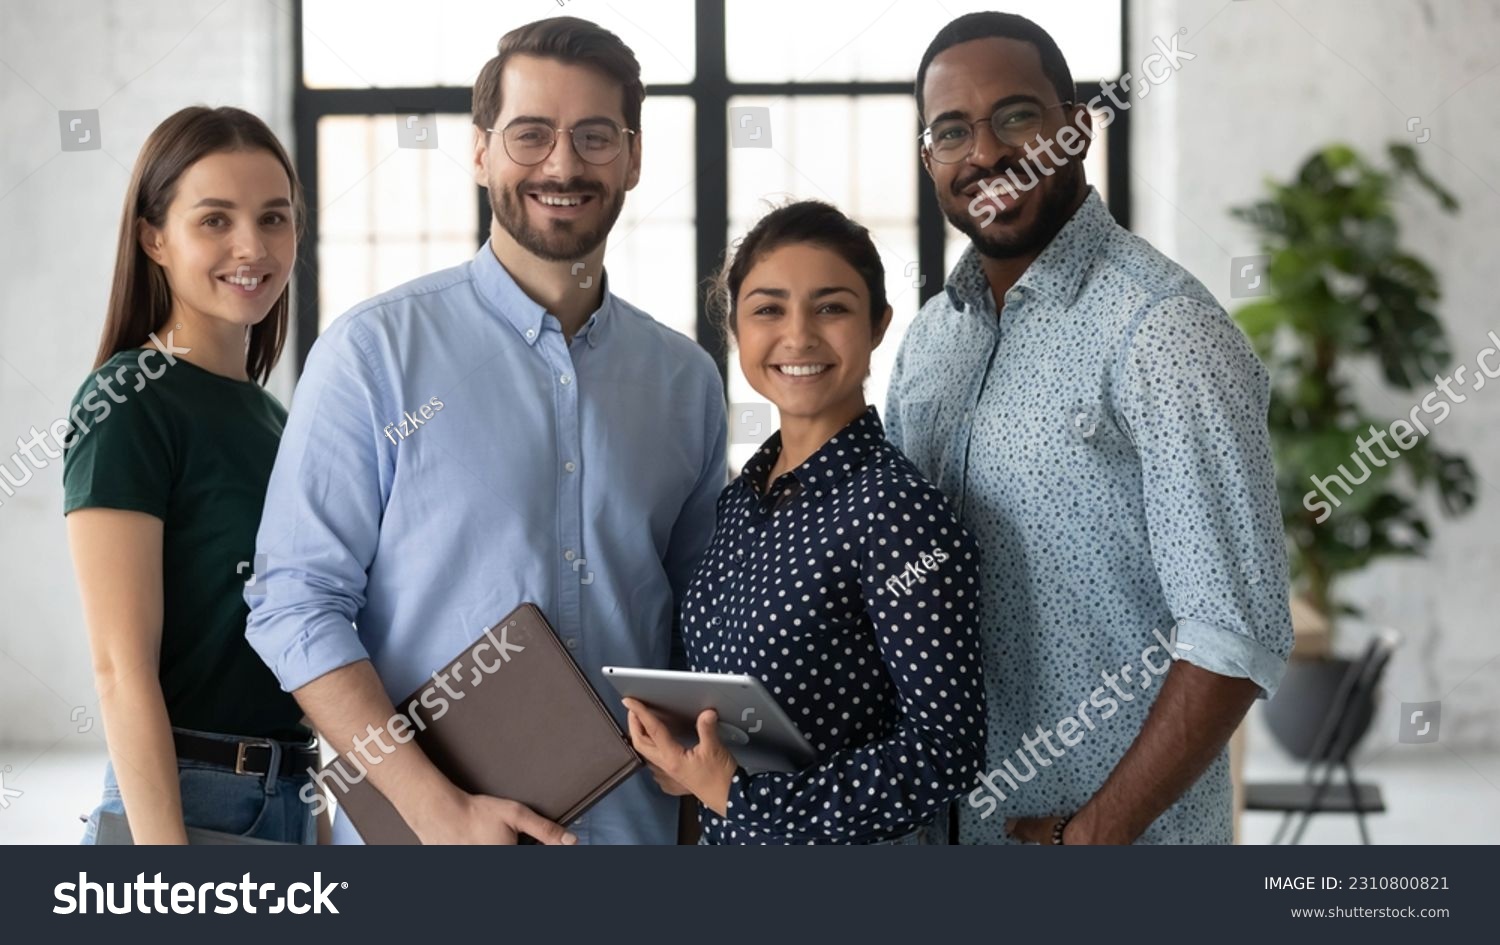 Group portrait of happy multiethnic united millennial team in modern office. Successful employees standing together, meeting in workspace, looking at camera and smiling Team work concept. Head shot #2310800821